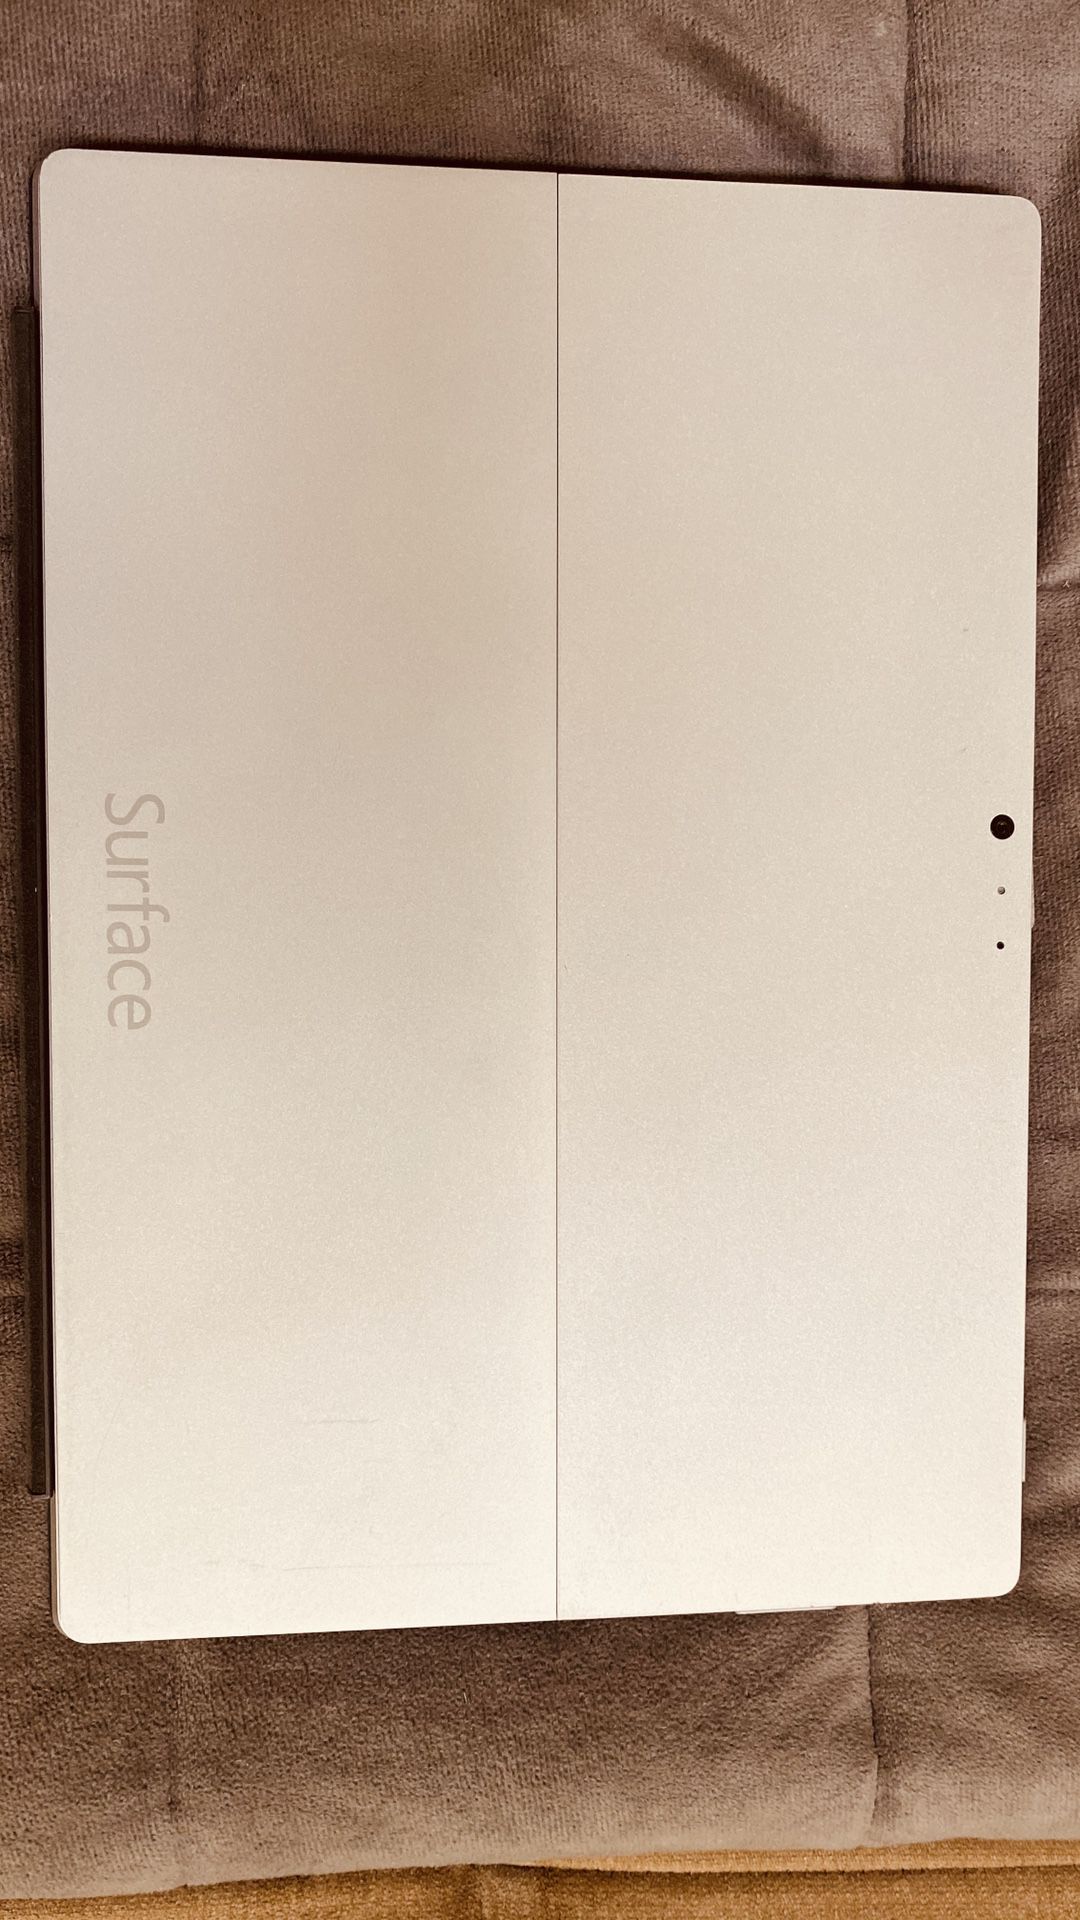 Microsoft Surface Pro 3 for Sale